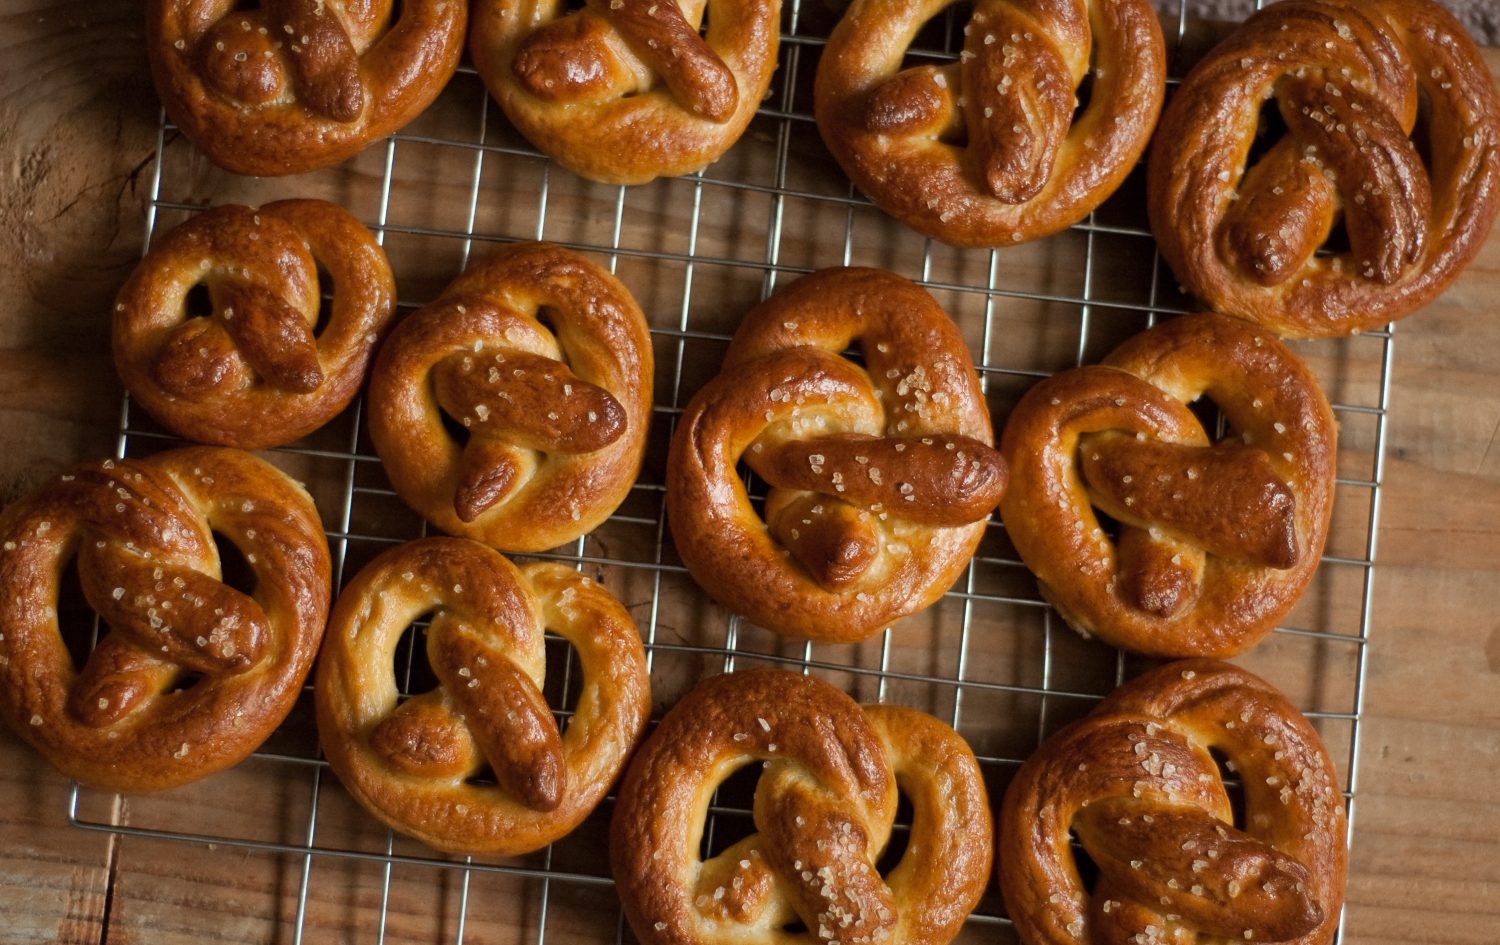 🥨 Pick Some Baked Goods and We’ll Reveal a Deep Truth About You Pretzels